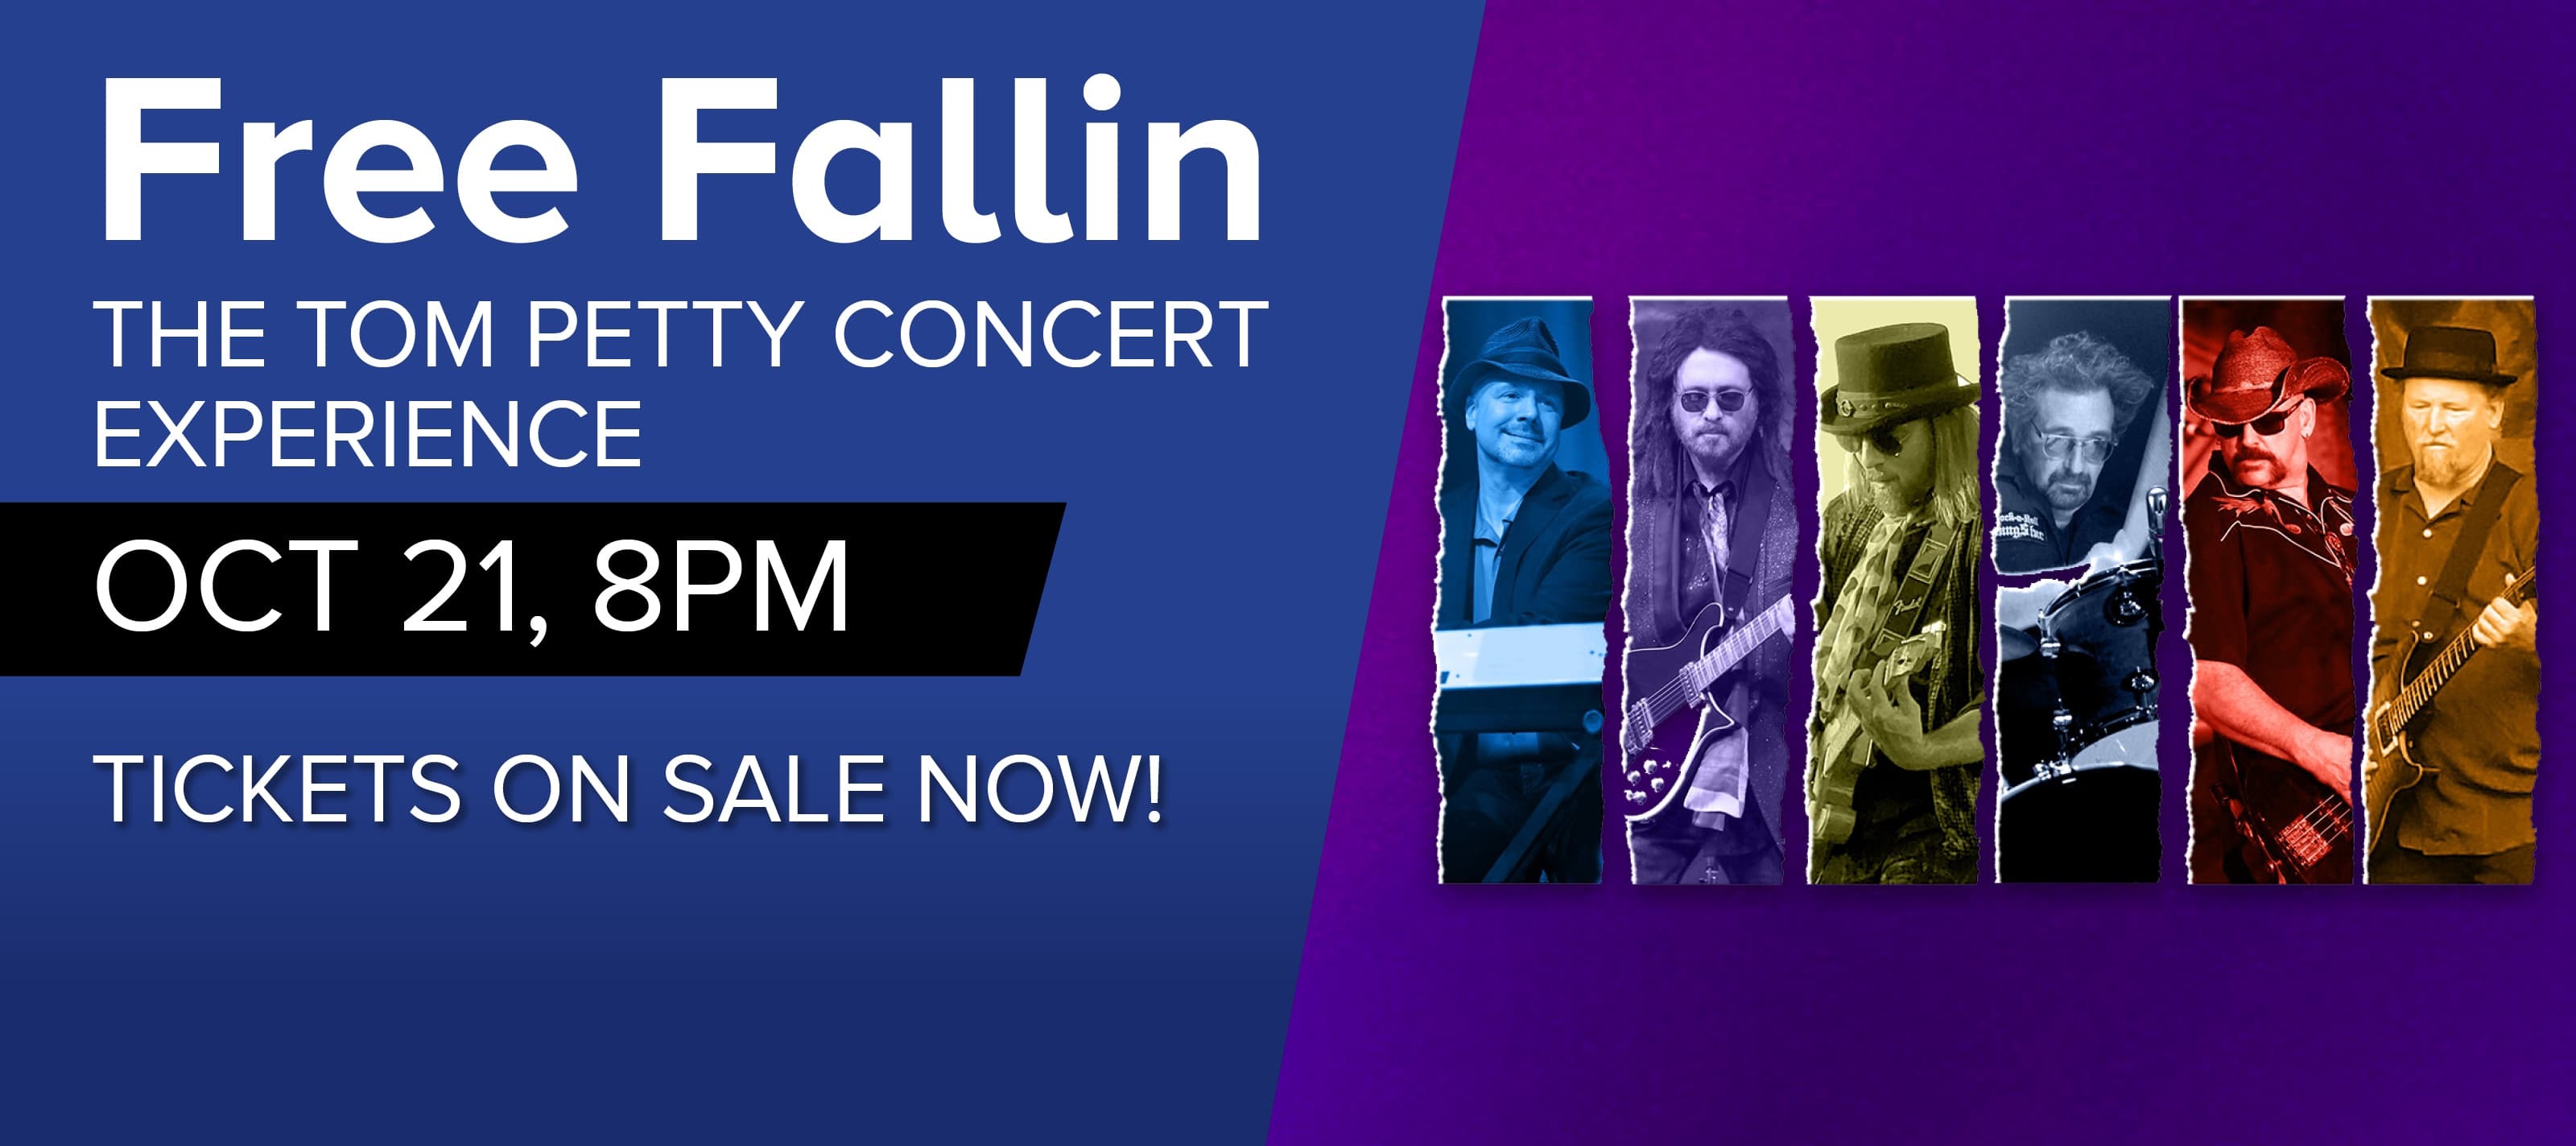 Free Fallin The Tom Petty Concert Experience Oct 21 8pm Tickets on sale now